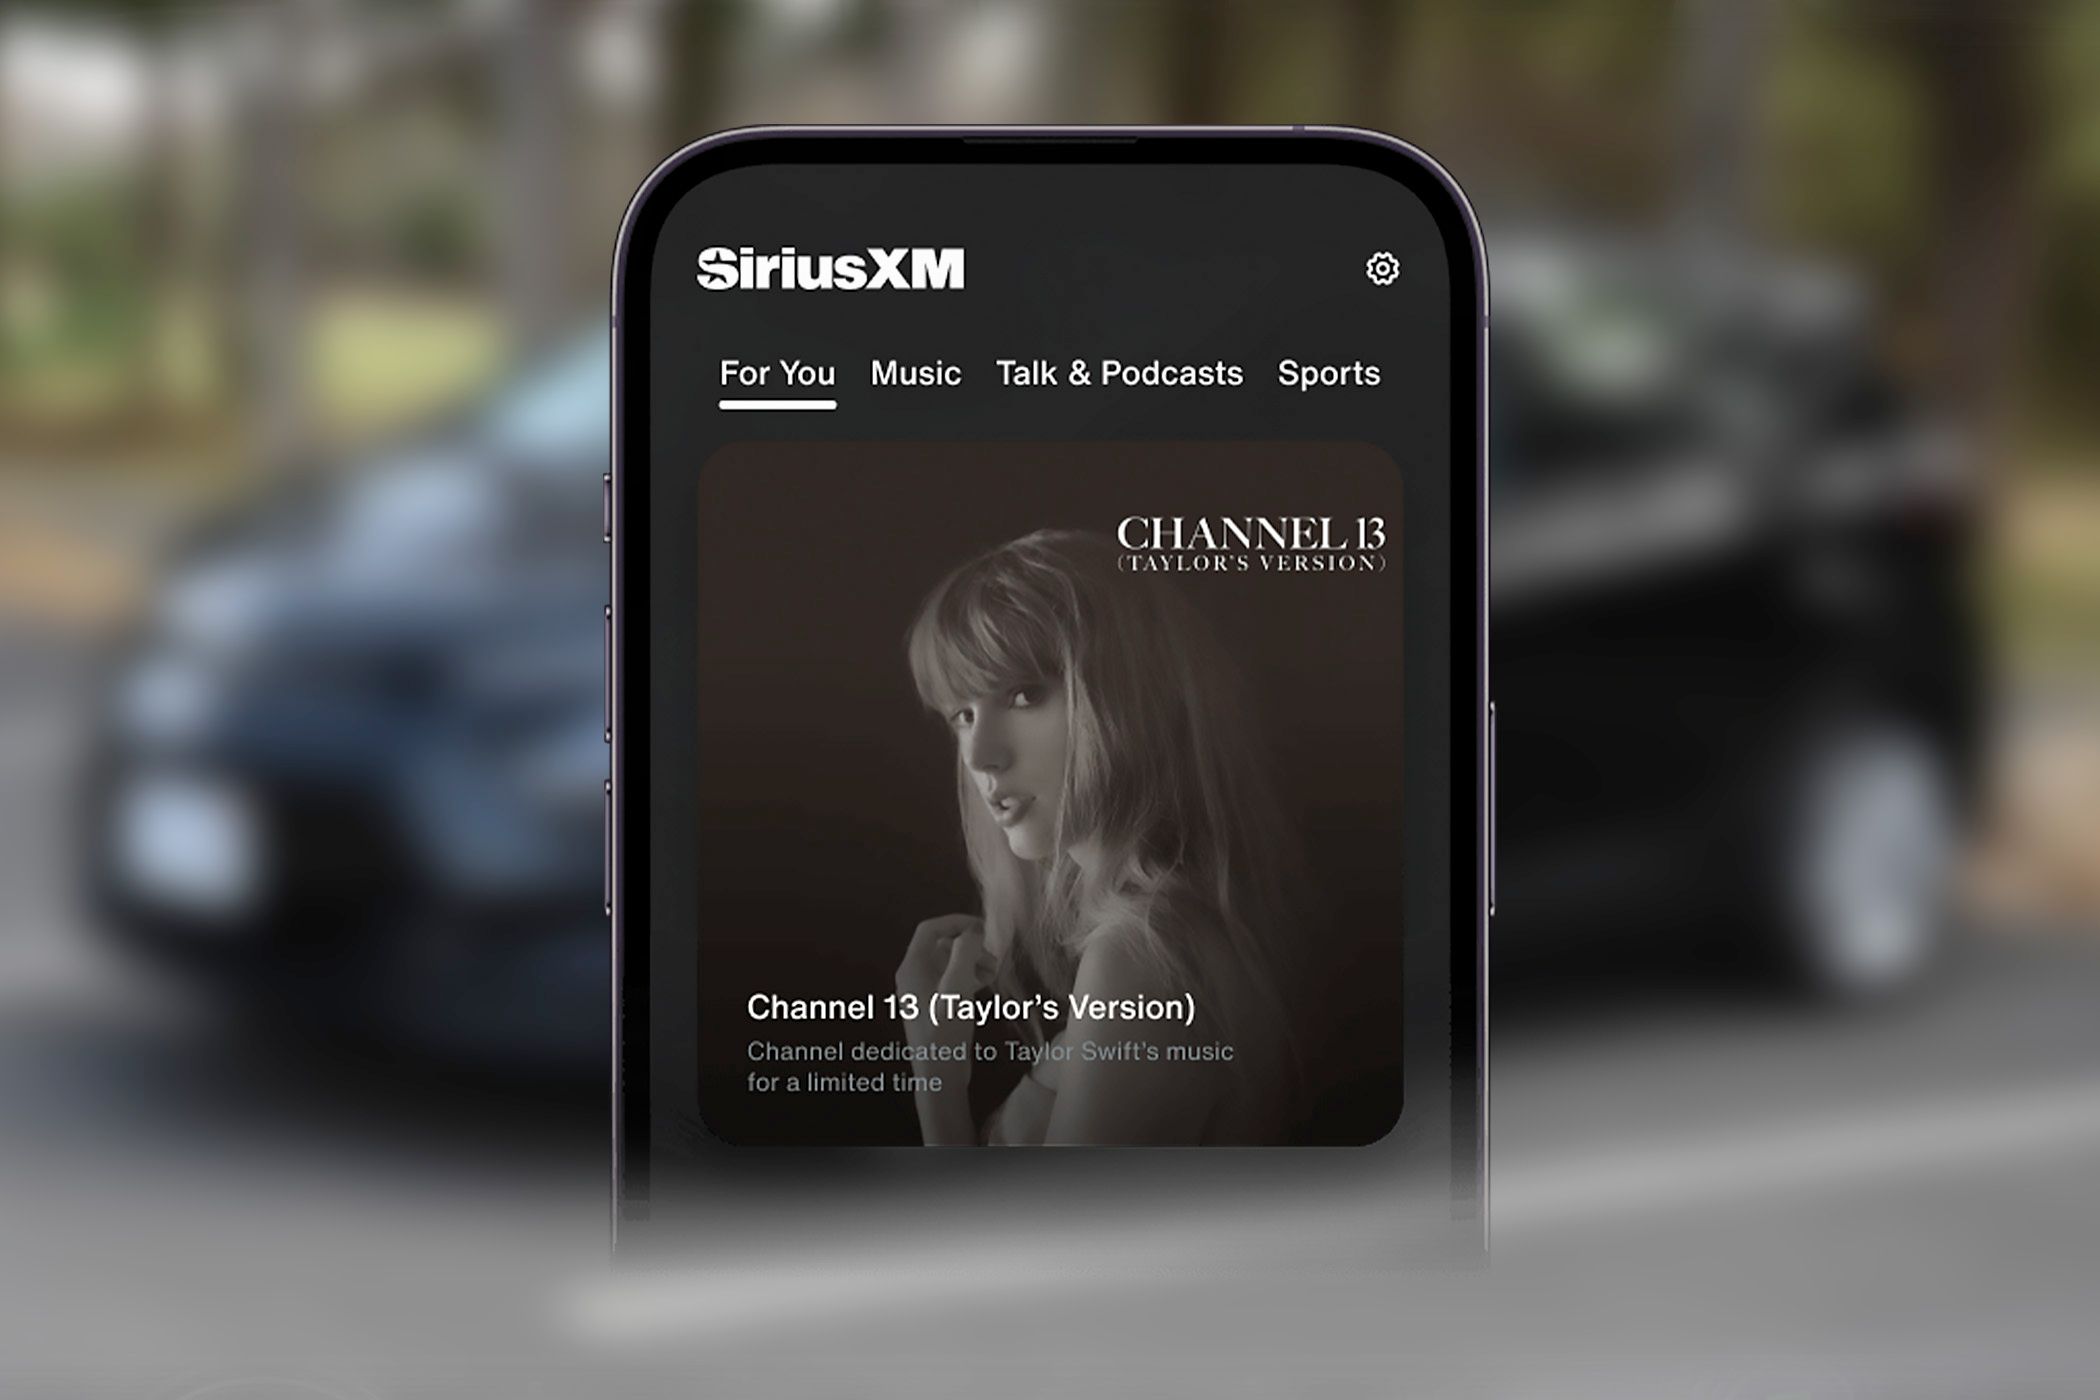 A phone playing SiriusXM Channel 13 with a car in the background.